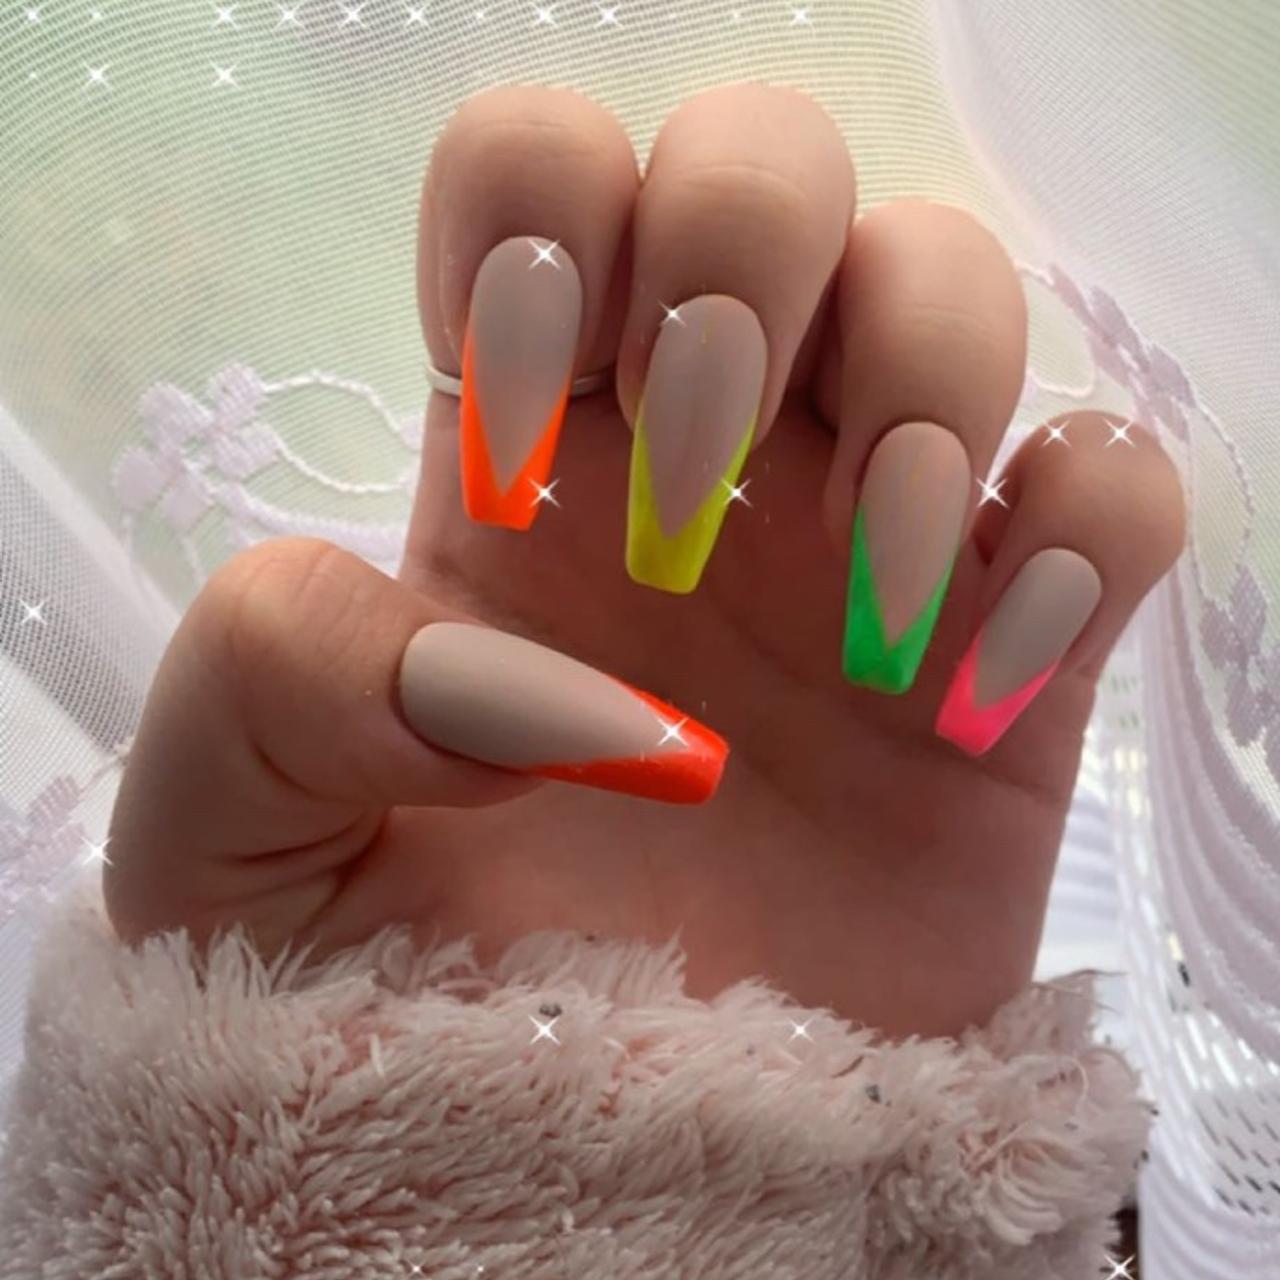 30 Super-Bright Neon Nail Ideas That Are an Instant Mood Boost